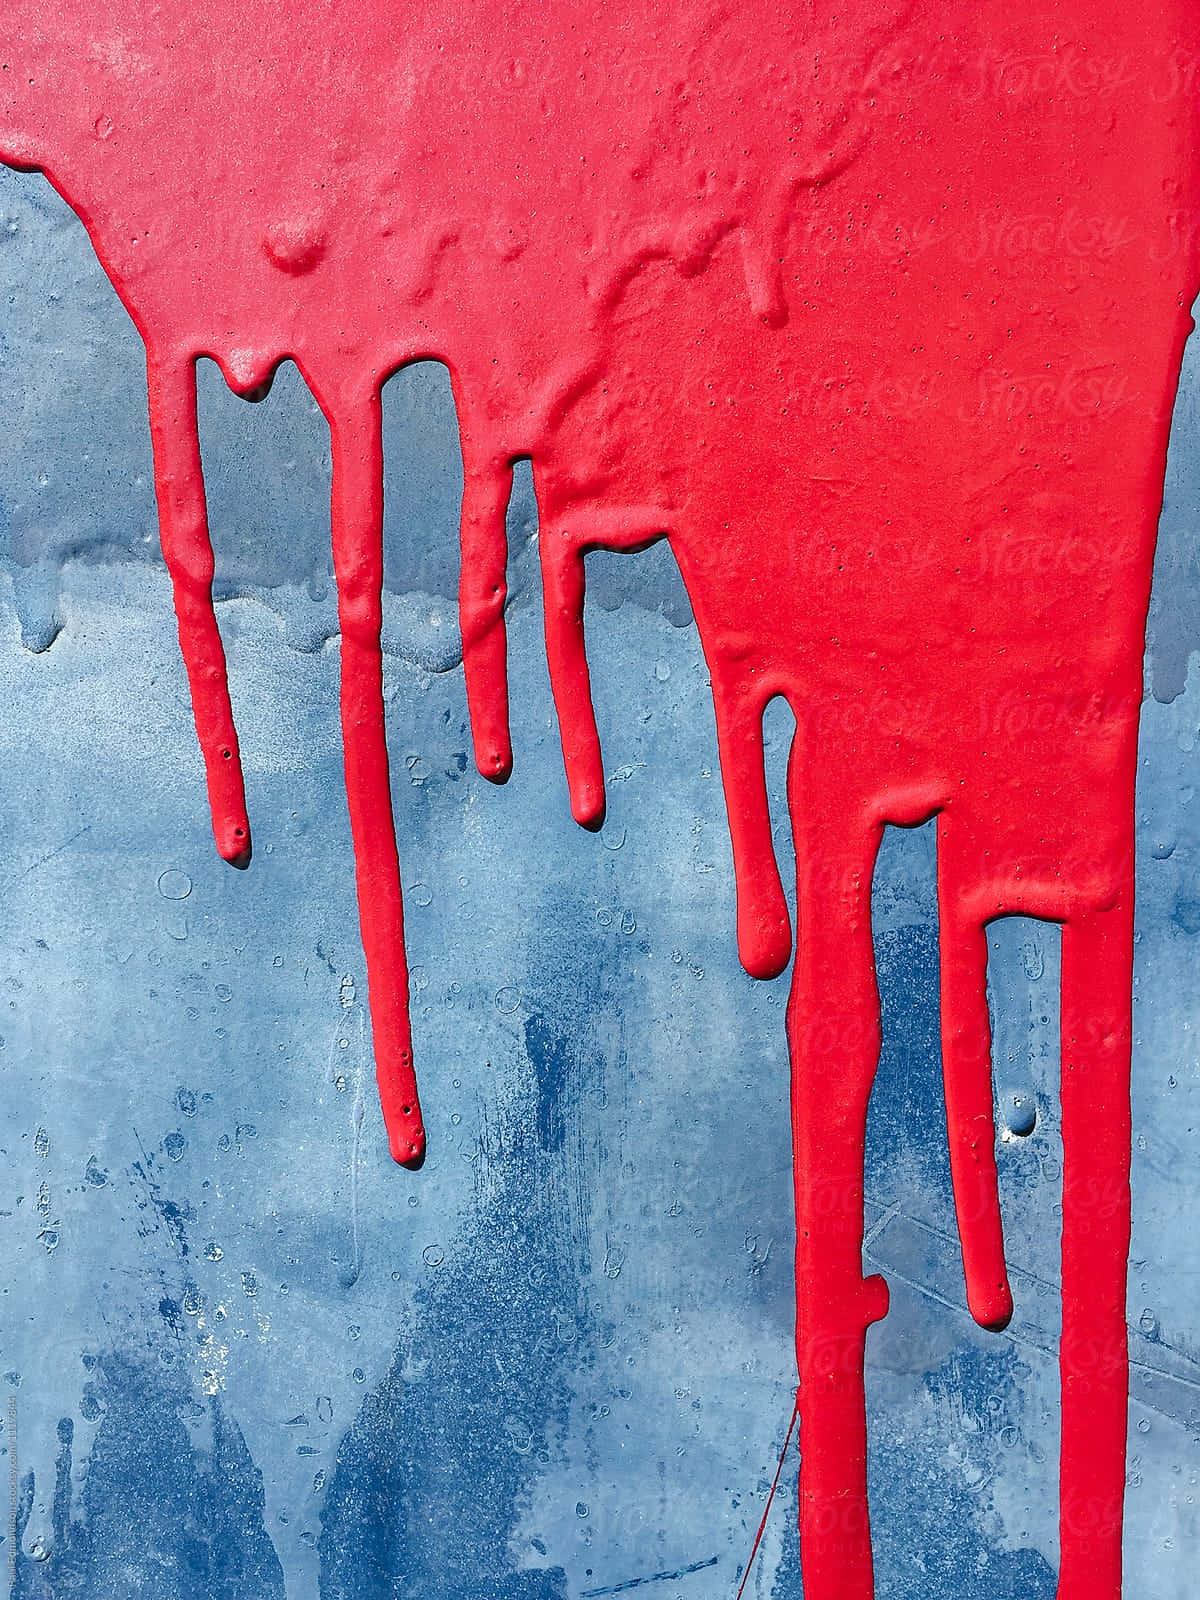 Caption: Vibrant Beauty of Dripping Paint Wallpaper